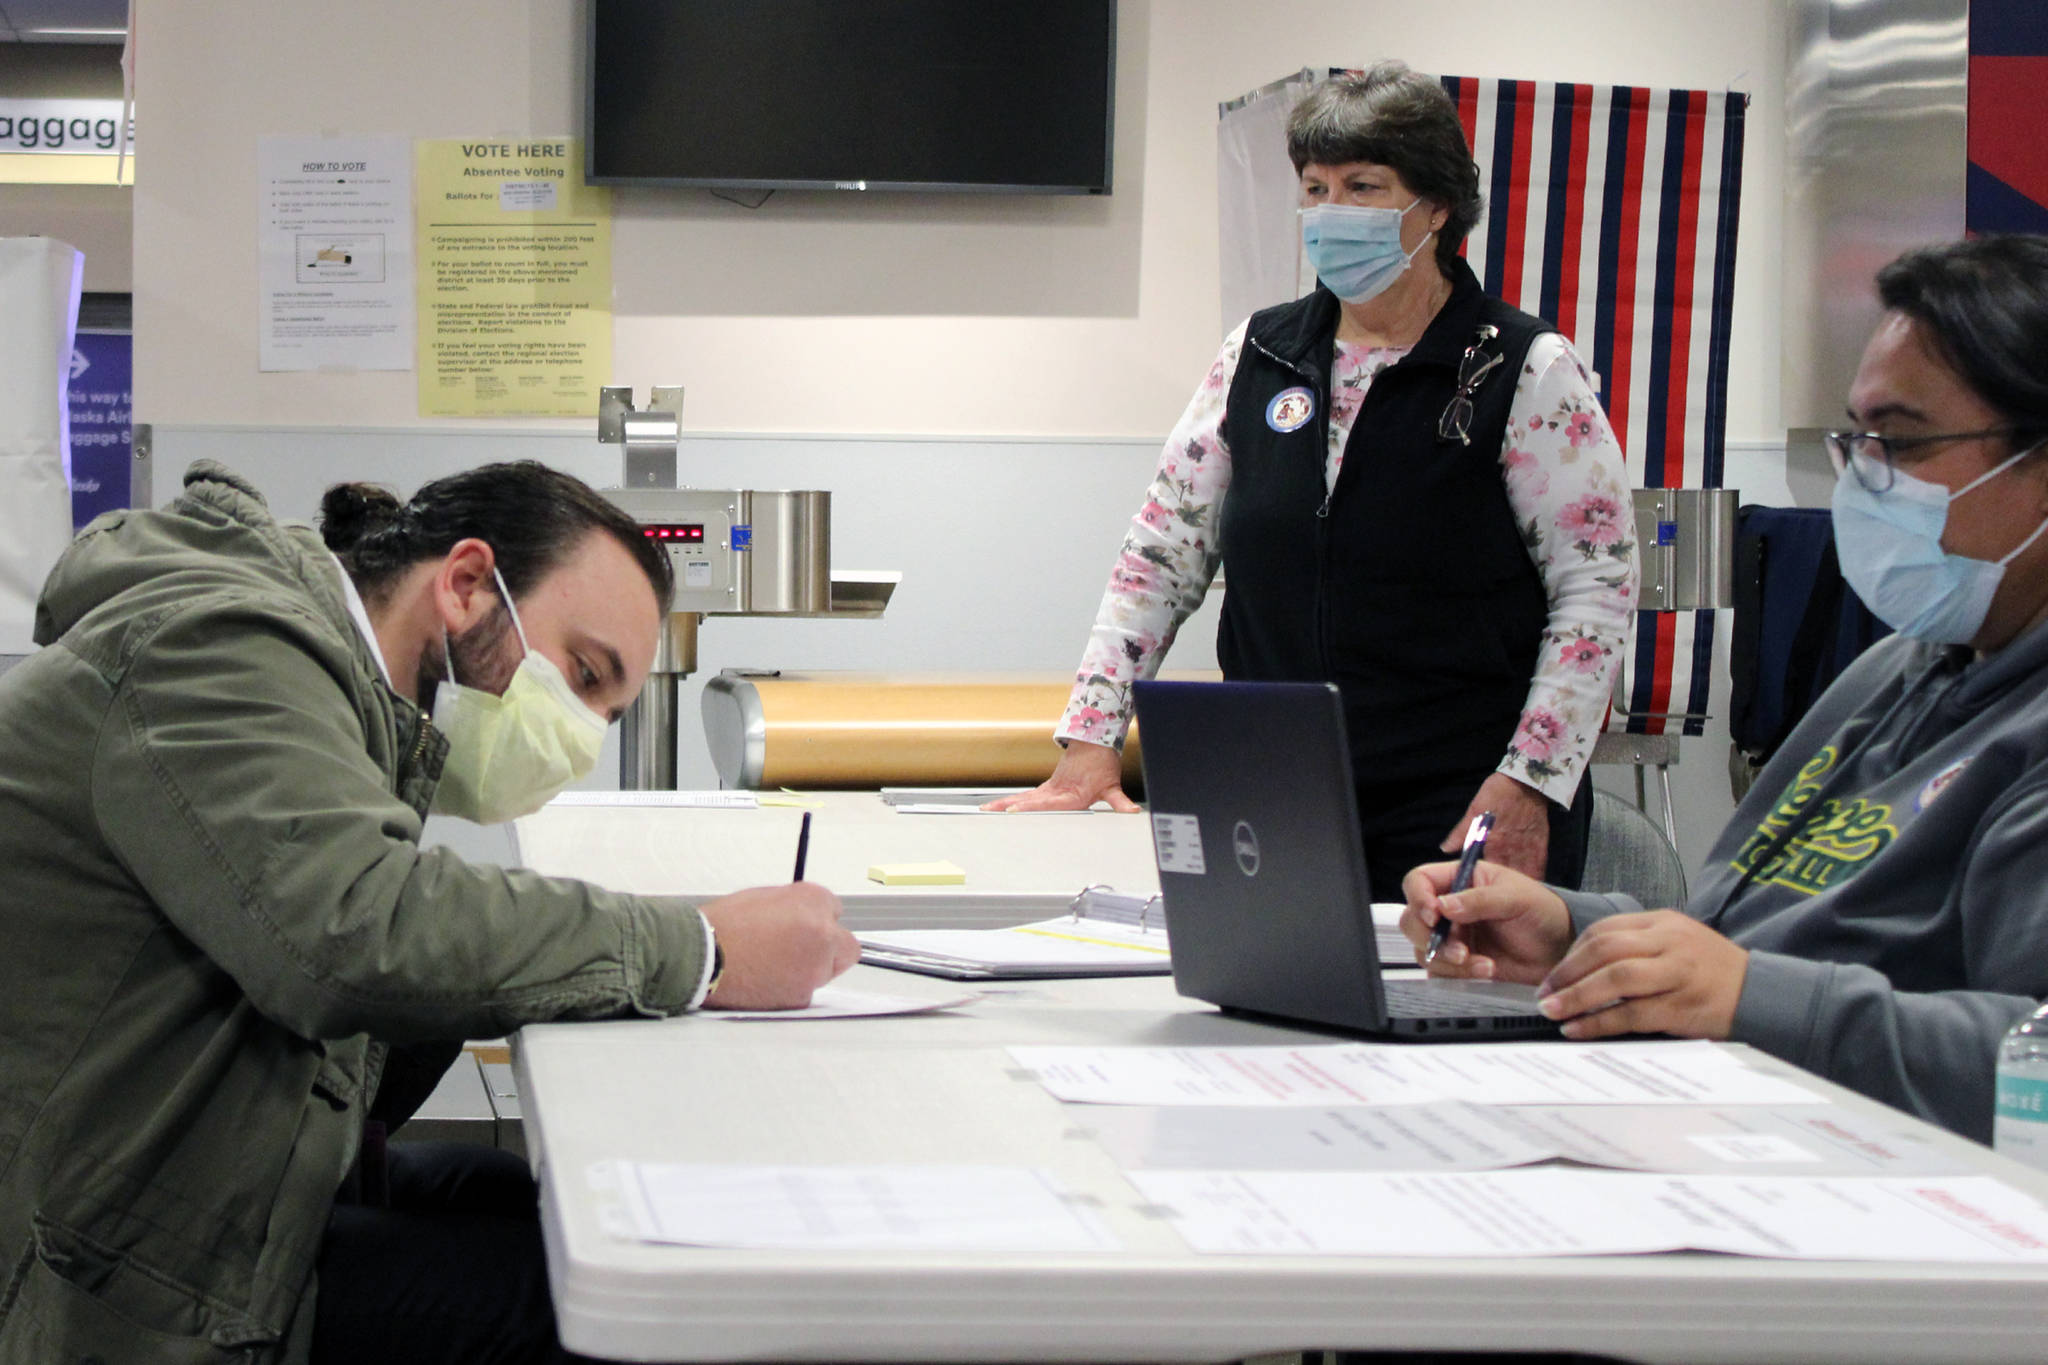 Ben Hohenstatt / Juneau Empire 
Nicolas Blanco, left, fills out paperwork ahead of voting absentee at Juneau International Airport on Election Day. Blanco recently moved to Juneau from North Carolina. He was assisted by election officials Carol Whelan, middle, and Lala Levale, right.